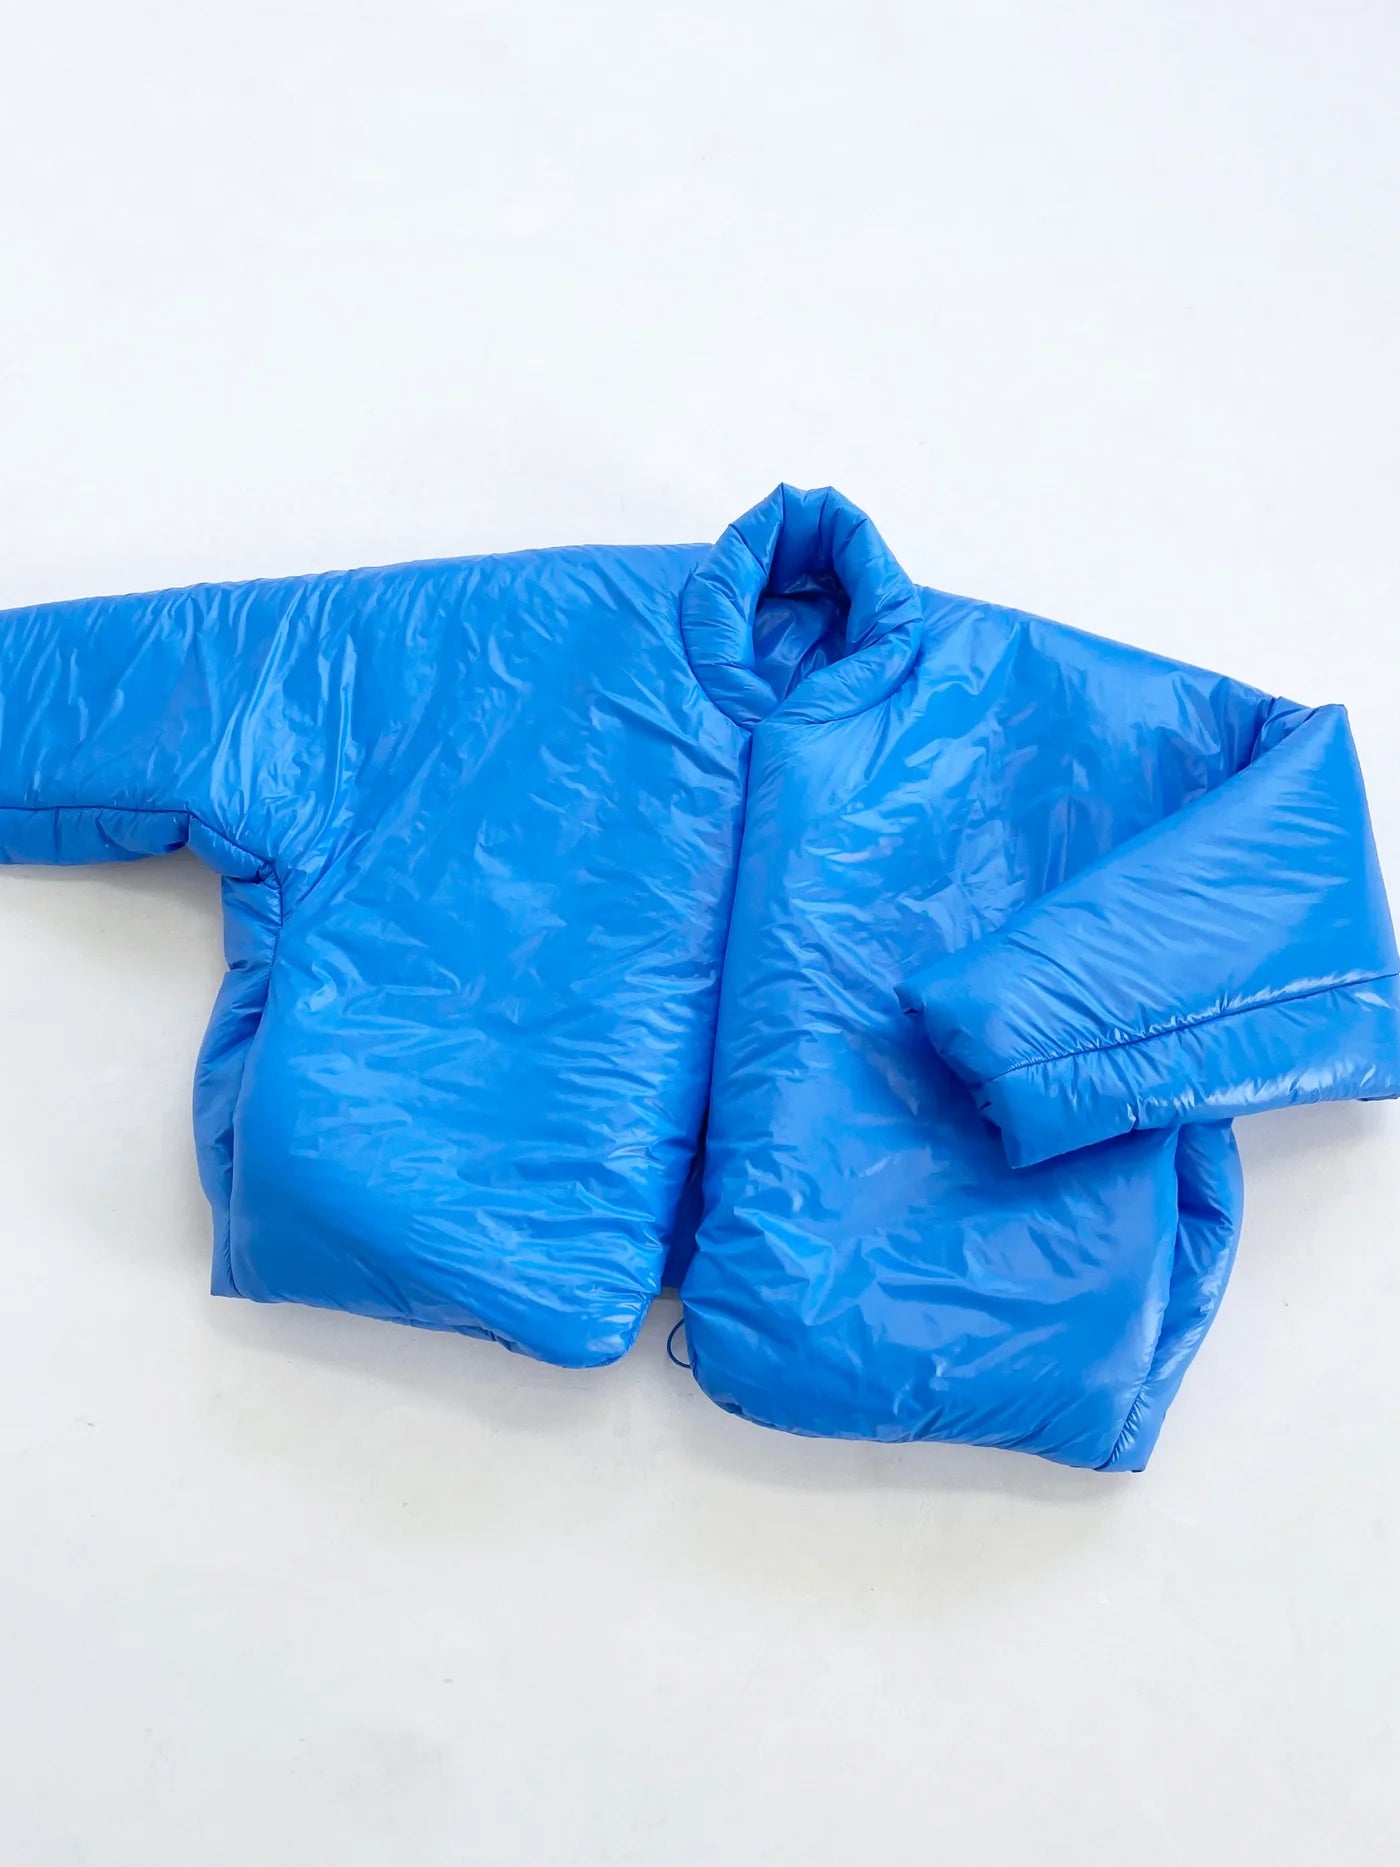 Bagged up Puffer Jacket